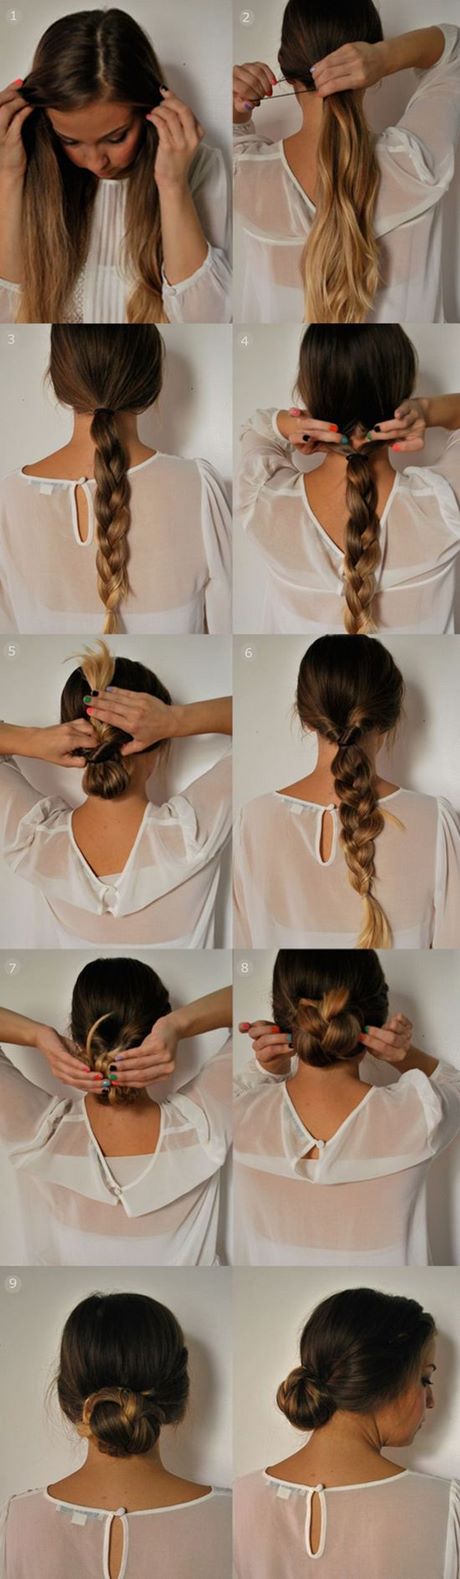 Easy put up hairstyles for shoulder length hair easy-put-up-hairstyles-for-shoulder-length-hair-59_5